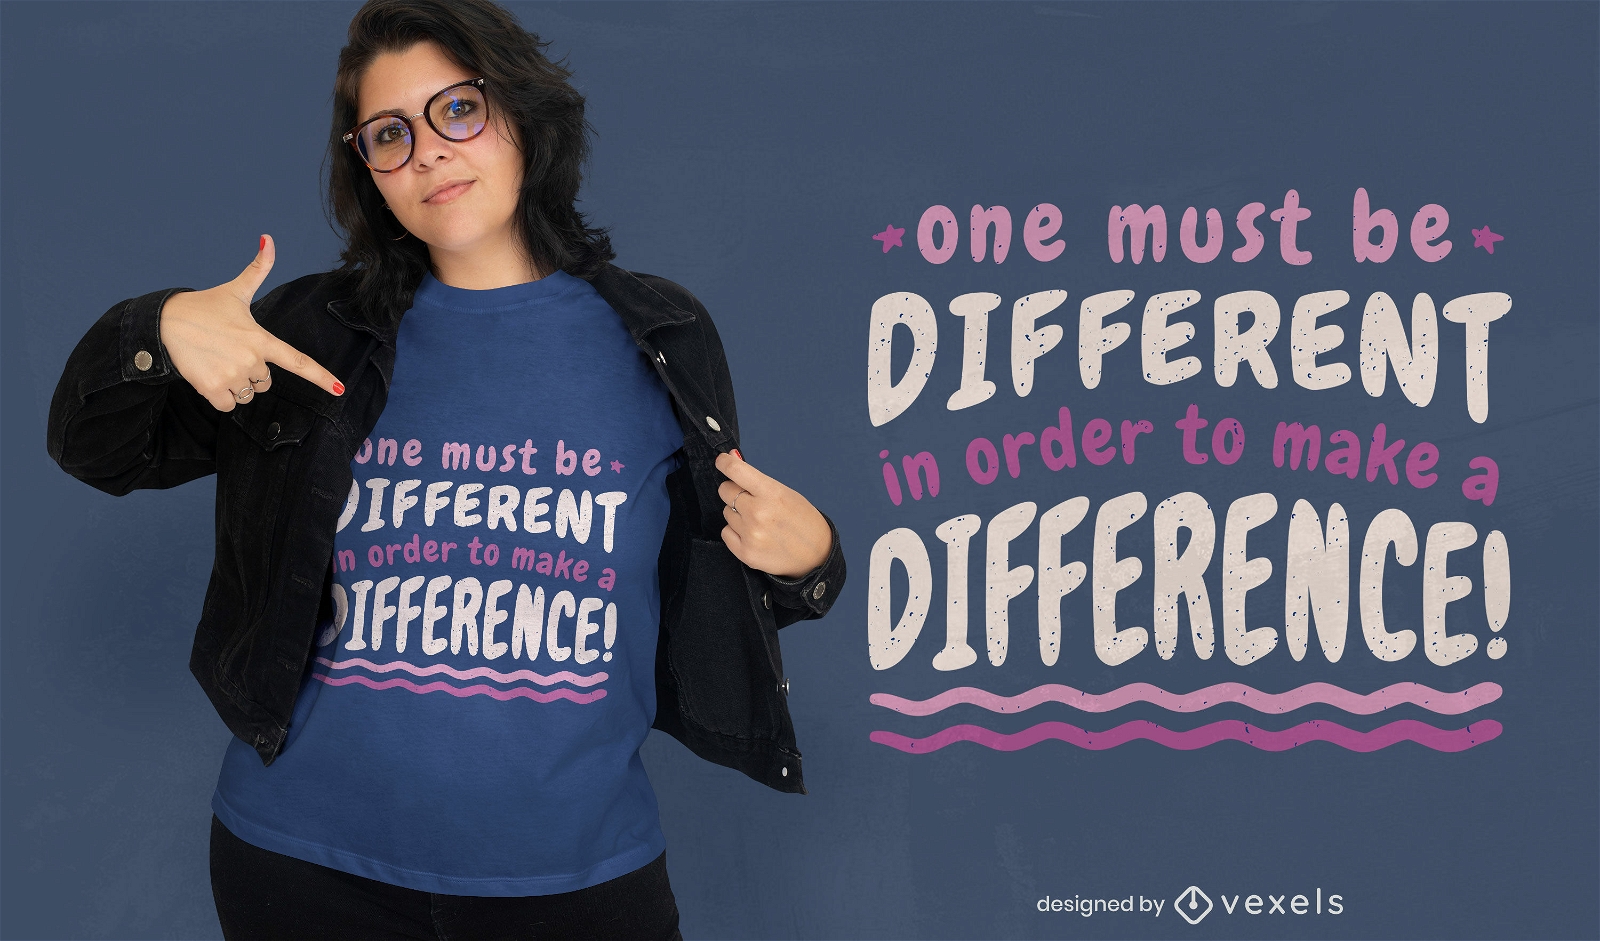 Make a difference quote t-shirt design